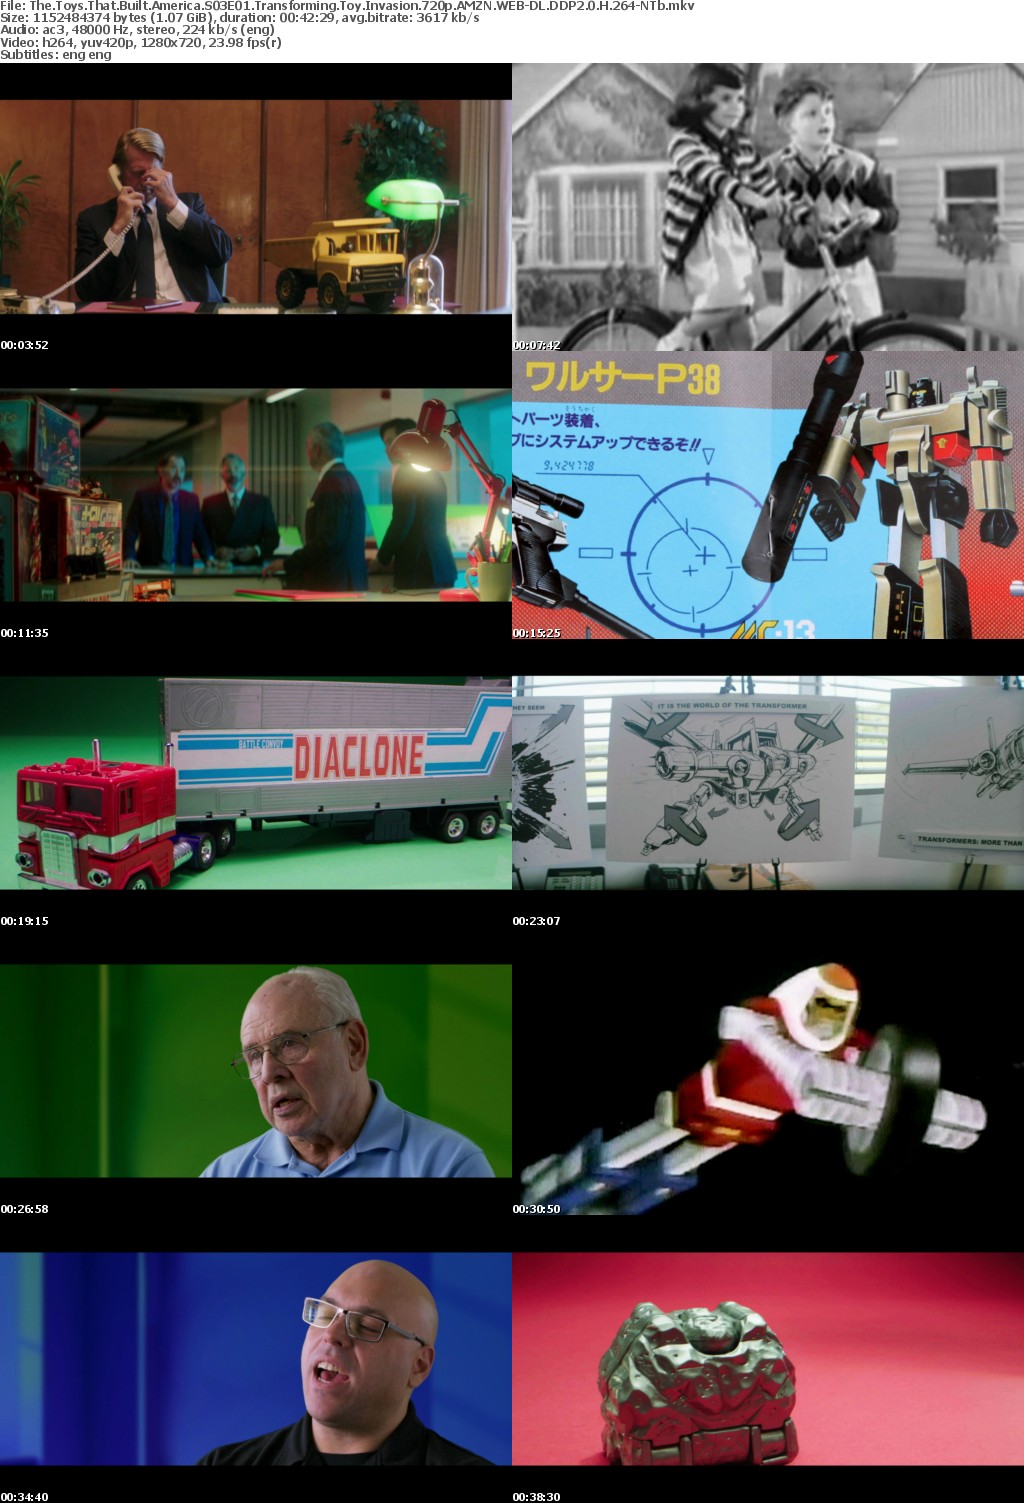 The Toys That Built America S03E01 Transforming Toy Invasion 720p AMZN WEB-DL DDP2 0 H 264-NTb